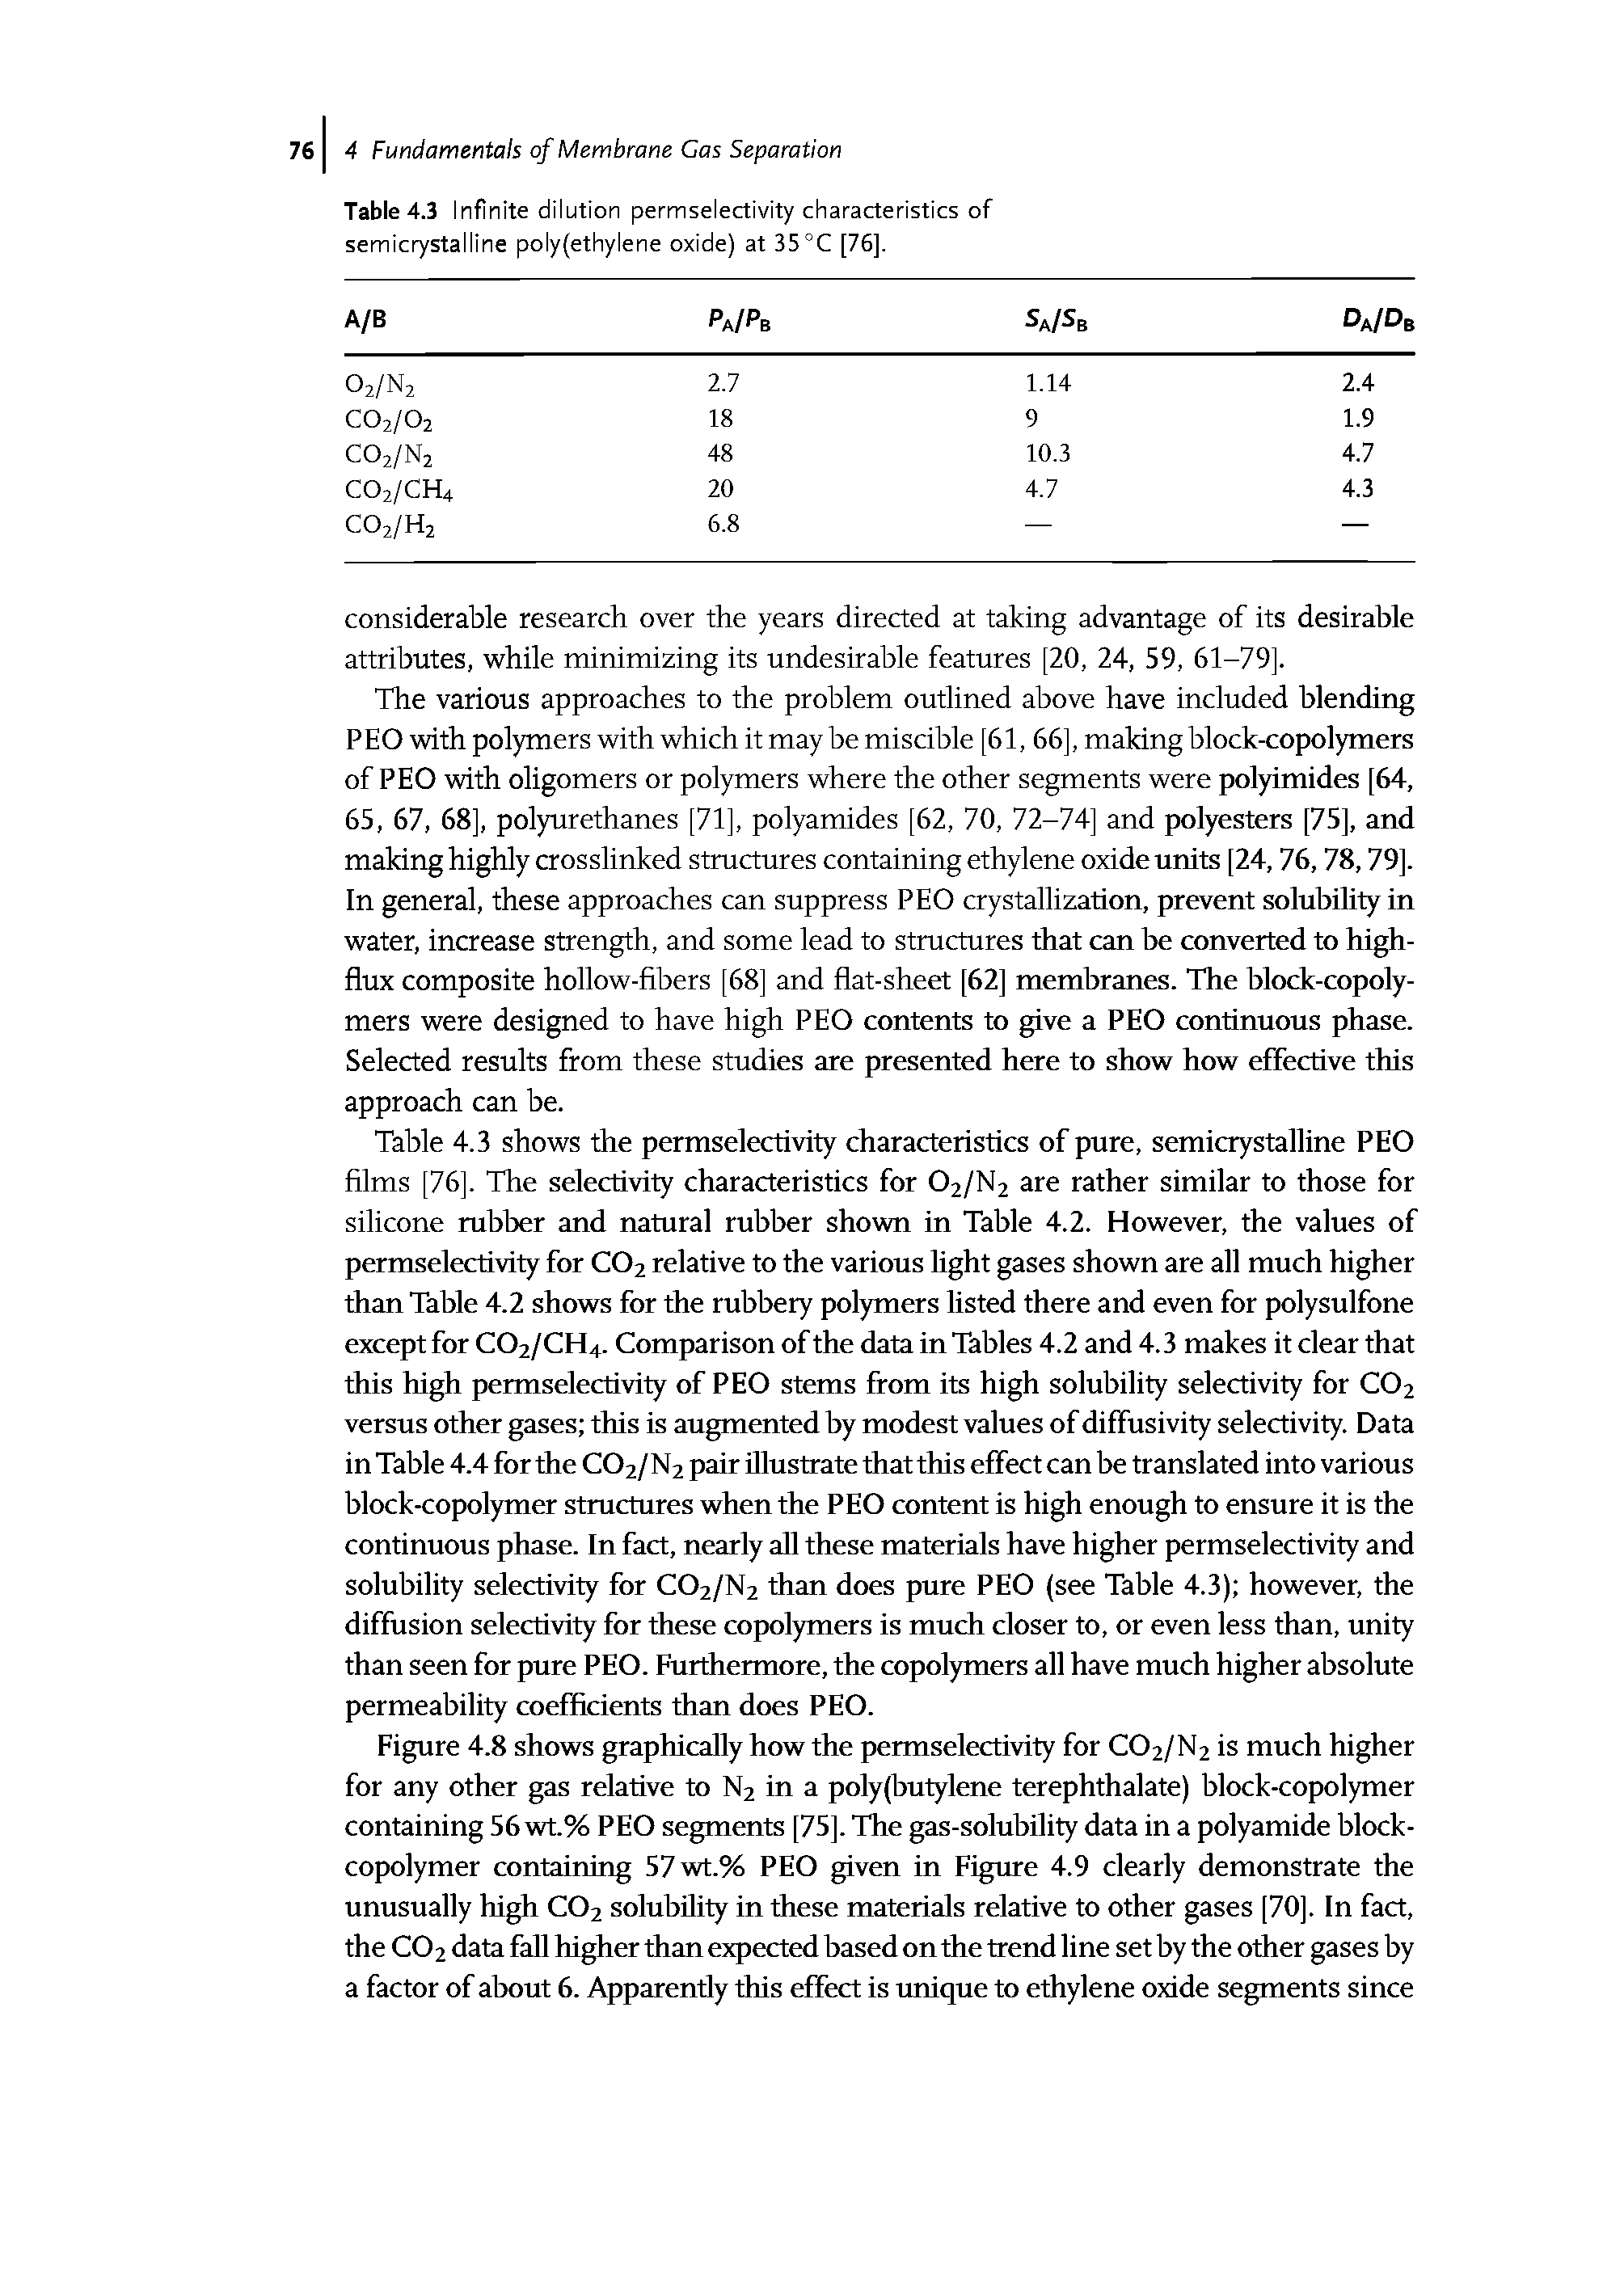 Table 4.3 shows the permselectivity characteristics of pure, semicrystalline PEO films [76]. The selectivity characteristics for 02/N2 are rather similar to those for silicone rubber and natural rubber shown in Table 4.2. However, the values of permselectivity for C02 relative to the various light gases shown are all much higher than Table 4.2 shows for the rubbery polymers listed there and even for polysulfone except for C02/CH4. Comparison of the data in Tables 4.2 and 4.3 makes it clear that this high permselectivity of PEO stems from its high solubility selectivity for C02 versus other gases this is augmented by modest values of diffusivity selectivity. Data in Table 4.4 for the C02/N2 pair illustrate that this effect can be translated into various block-copolymer structures when the PEO content is high enough to ensure it is the continuous phase. In fact, nearly all these materials have higher permselectivity and solubility selectivity for C02/N2 than does pure PEO (see Table 4.3) however, the diffusion selectivity for these copolymers is much closer to, or even less than, unity than seen for pure PEO. Furthermore, the copolymers all have much higher absolute permeability coefficients than does PEO.